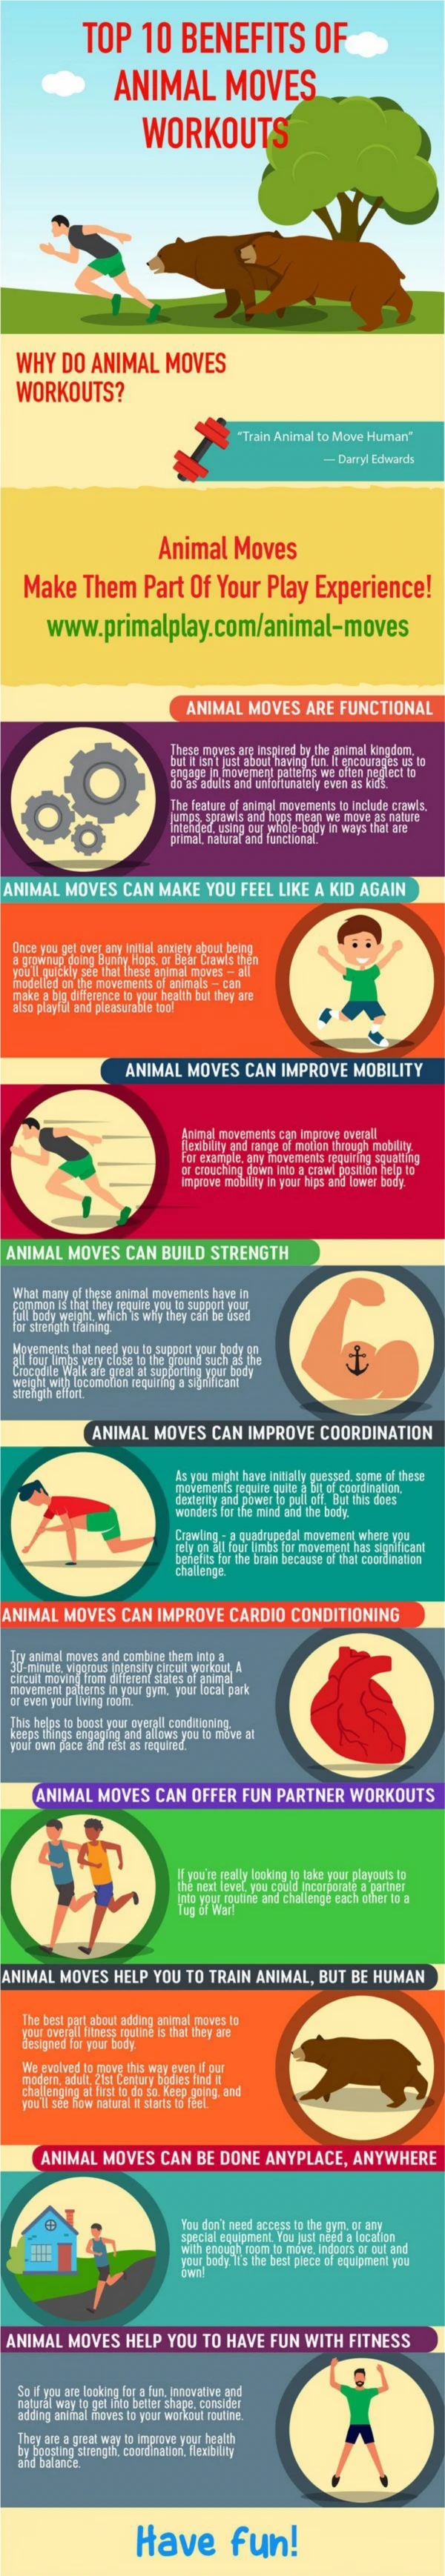 10 Benefits of Animal Moves Workouts